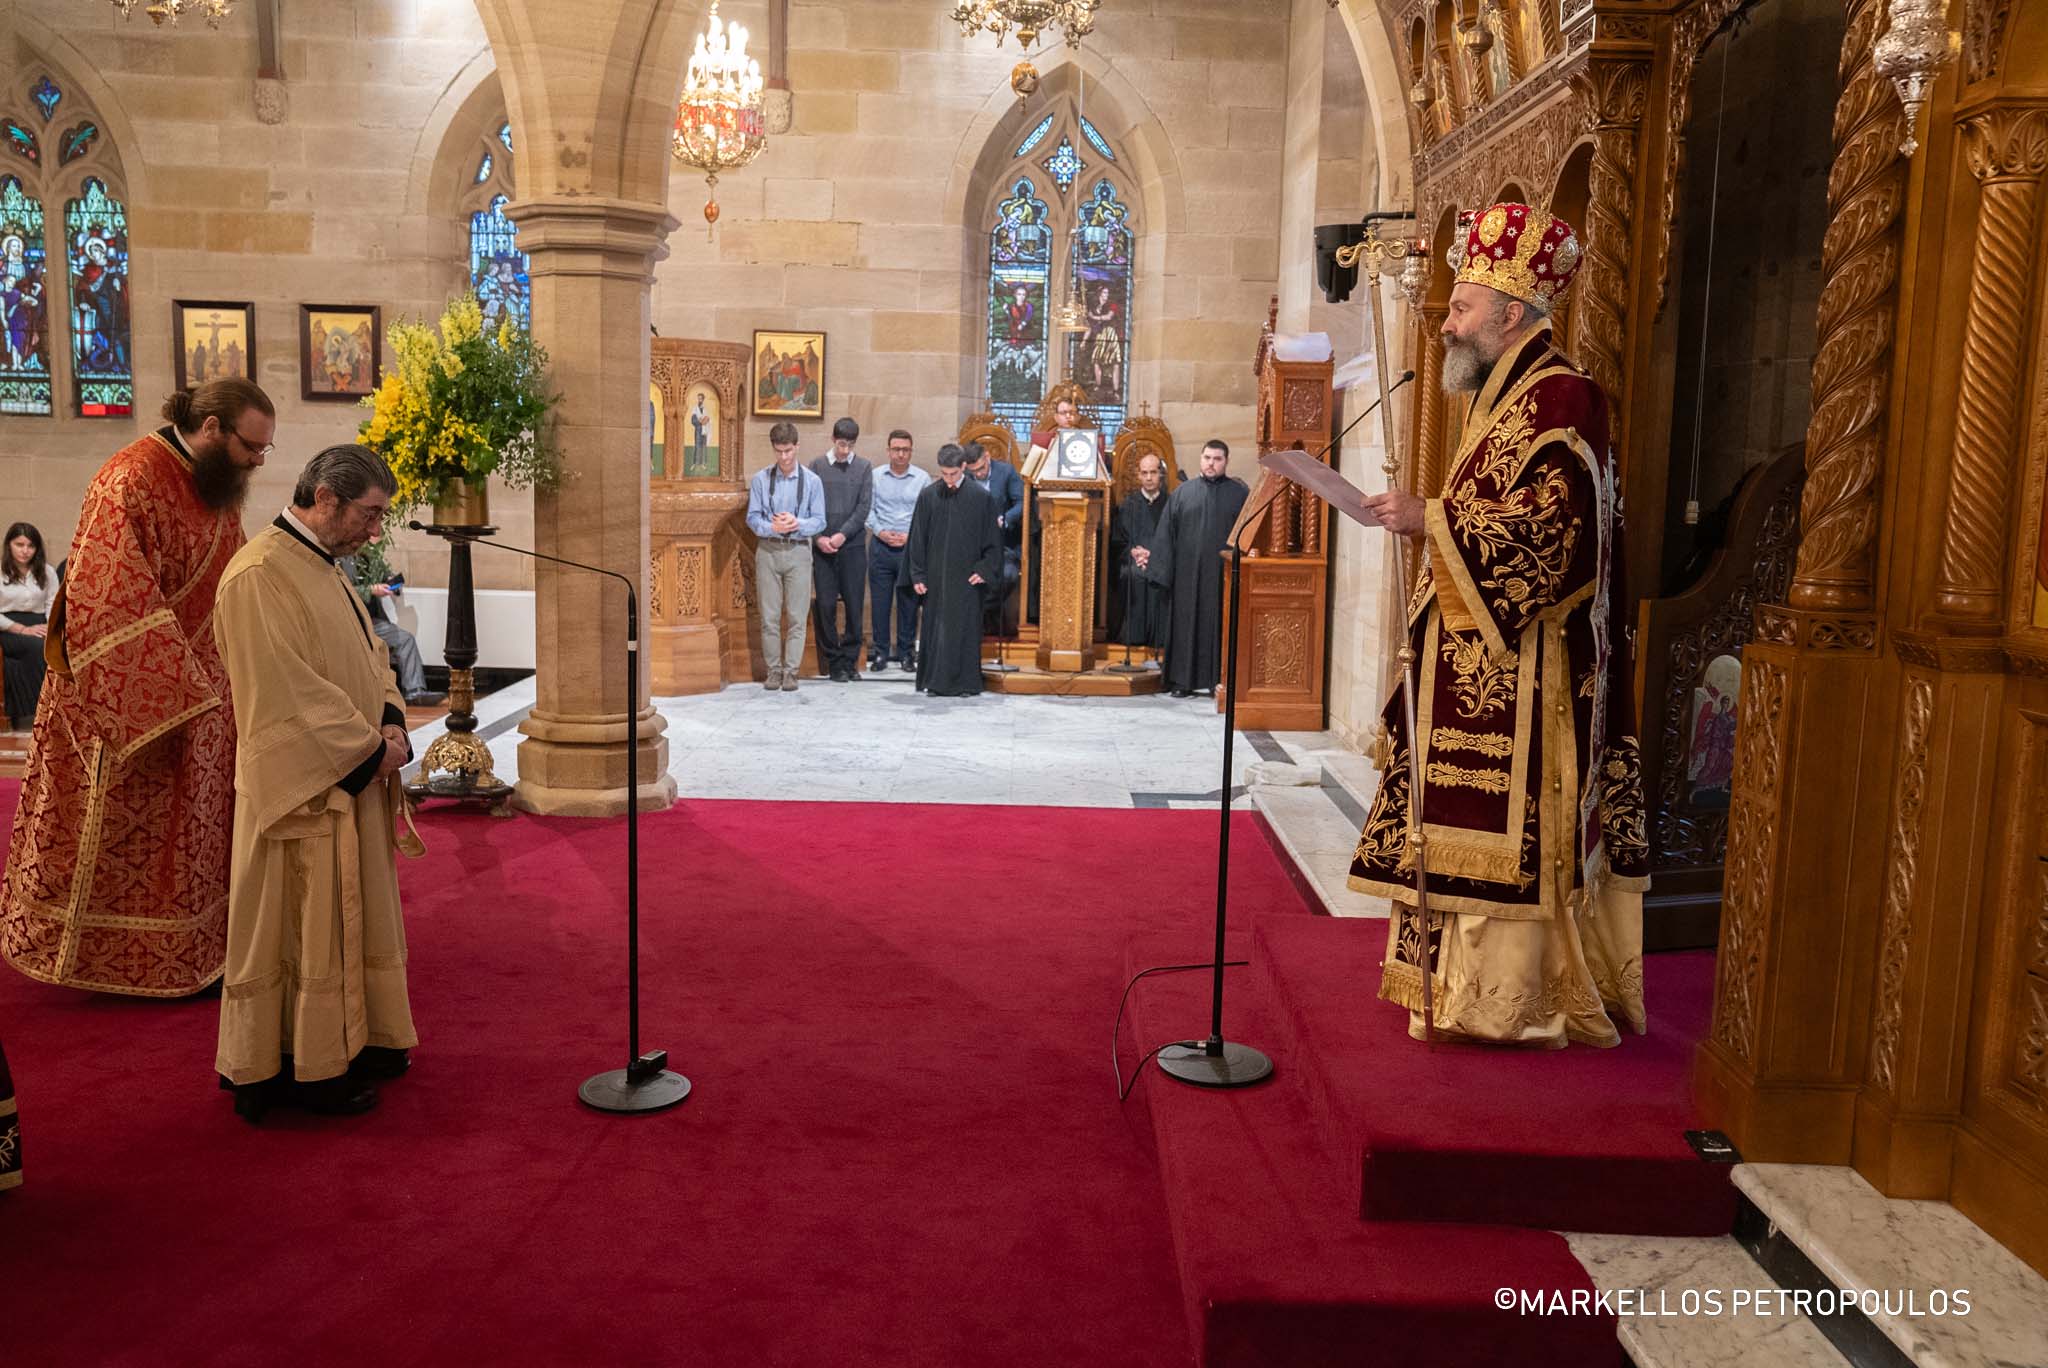 Ordination of a Presbyter and Deacon by Archbishop Makarios of Australia in Sydney